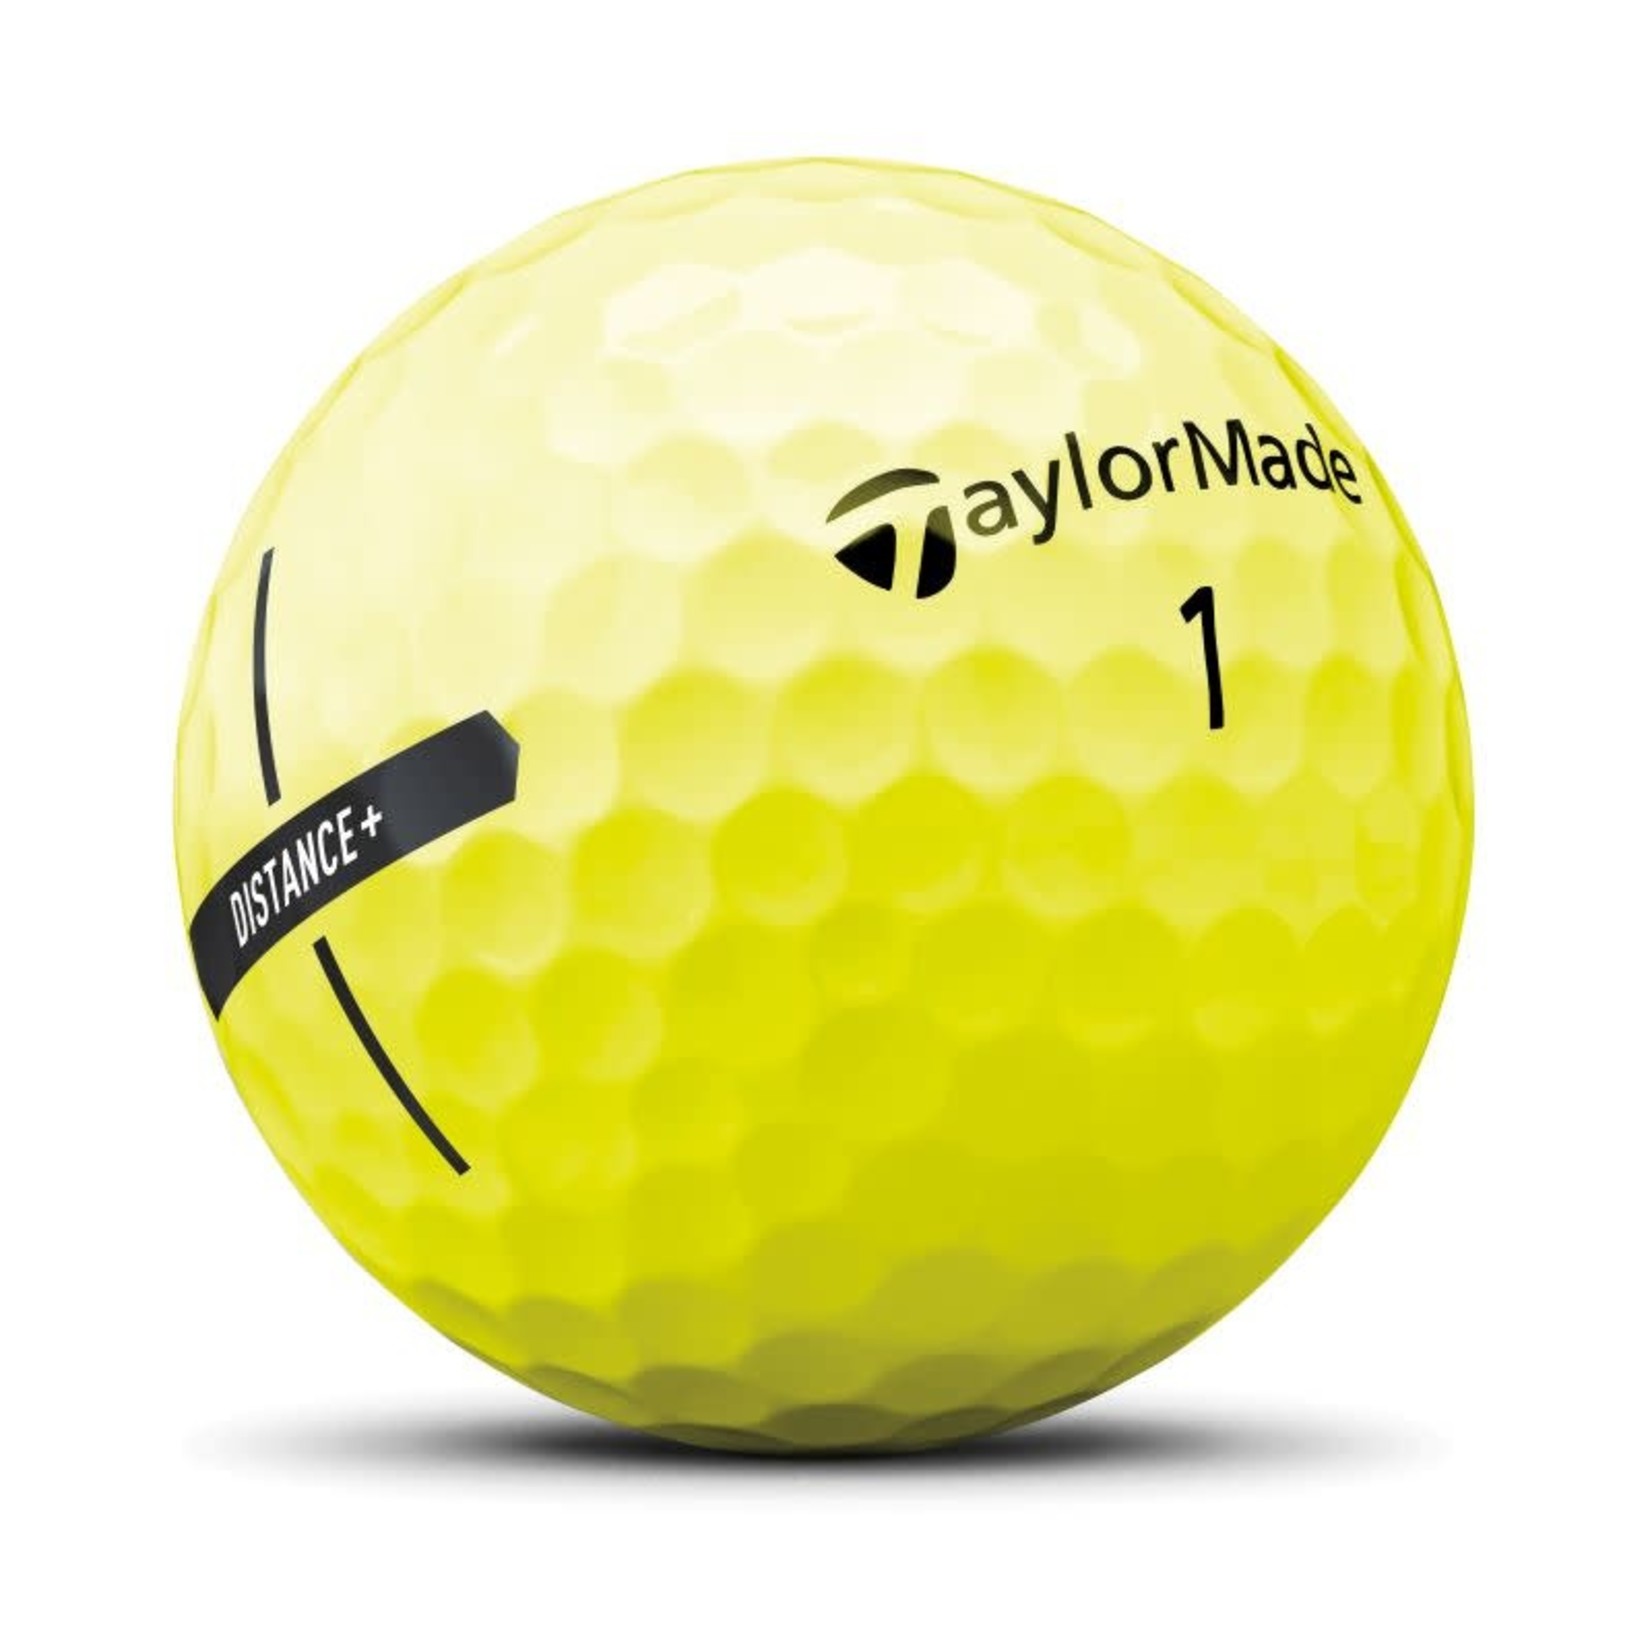 Taylor Made TaylorMade Distance + Yellow